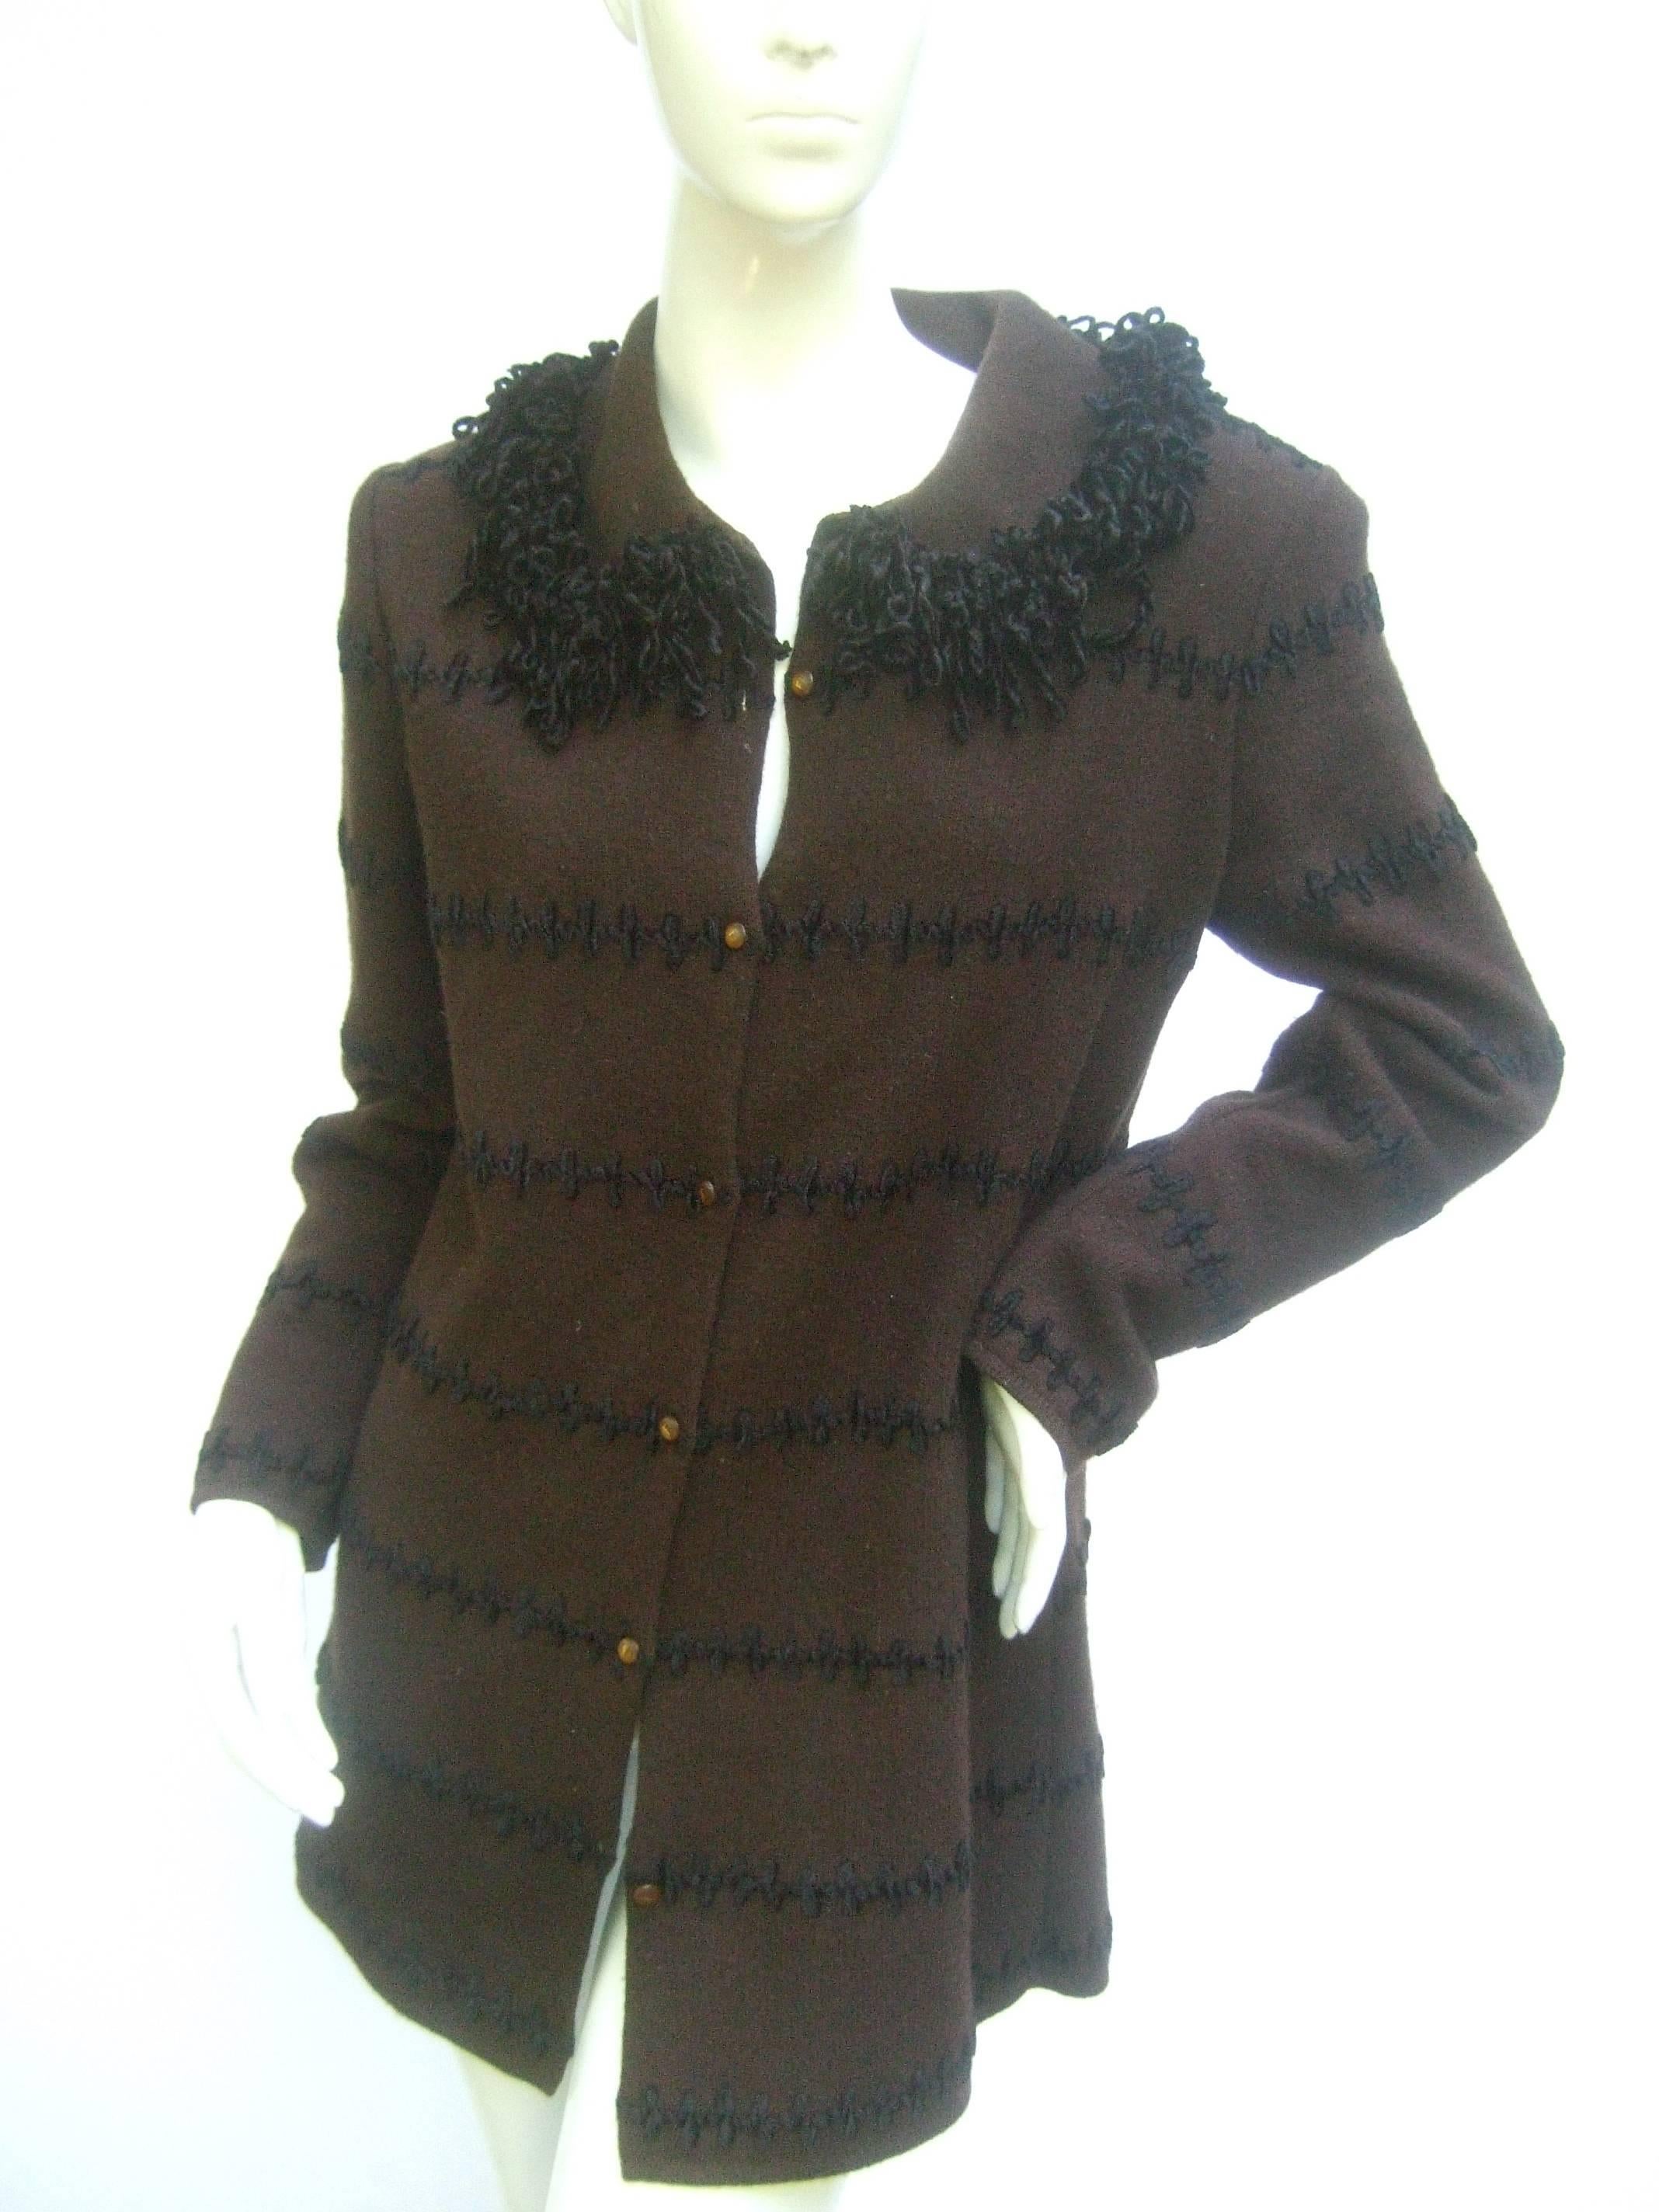 Fendi Italy Chocolate brown cardigan sweater c 1990s
The Italian brown wool knit cardigan is designed
with a black fringe knit collar and horizontal black
applique stitched knit bands 

The cardigan is adorned with small brown resin 
buttons